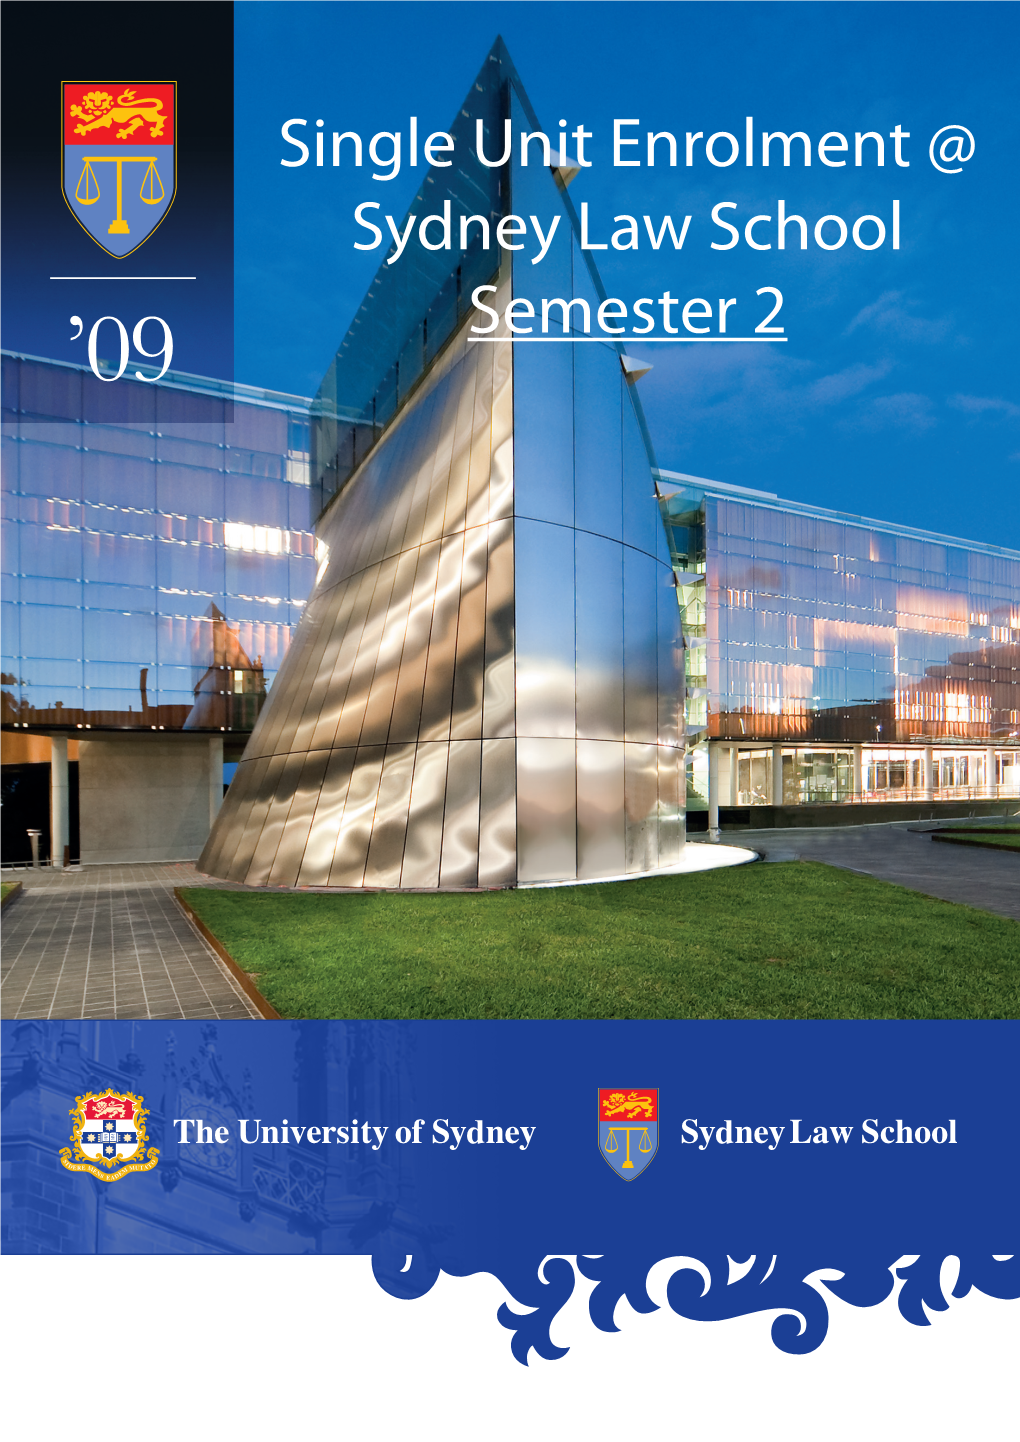 The Faculty of Law at the University of Sydney Is at the Forefront of Legal Education Both in Australia and Overseas